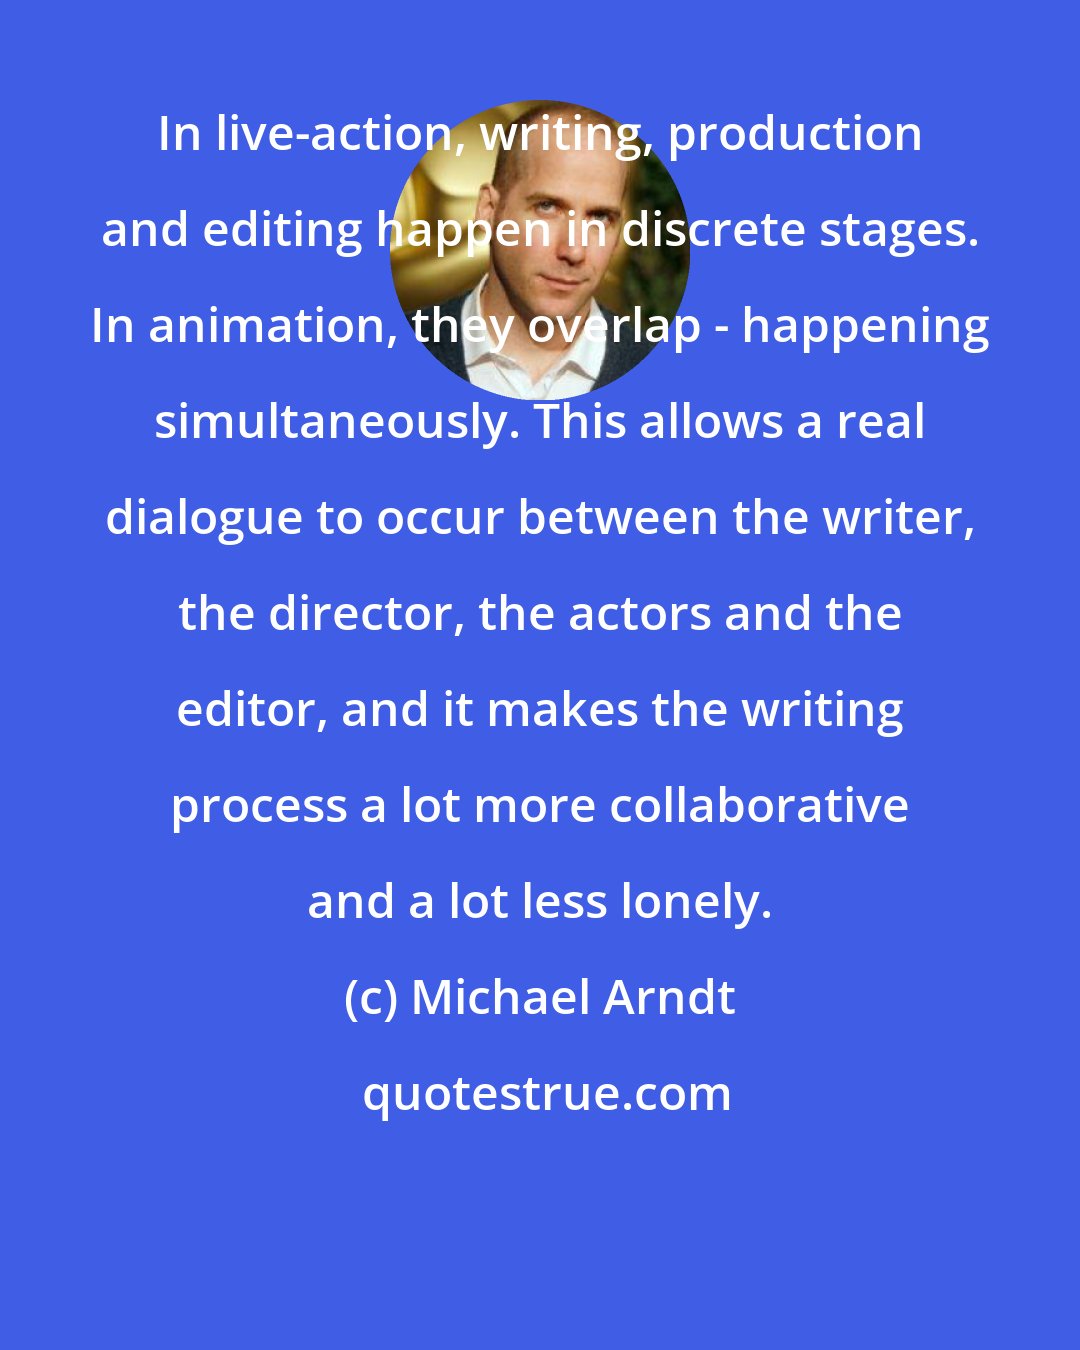 Michael Arndt: In live-action, writing, production and editing happen in discrete stages. In animation, they overlap - happening simultaneously. This allows a real dialogue to occur between the writer, the director, the actors and the editor, and it makes the writing process a lot more collaborative and a lot less lonely.